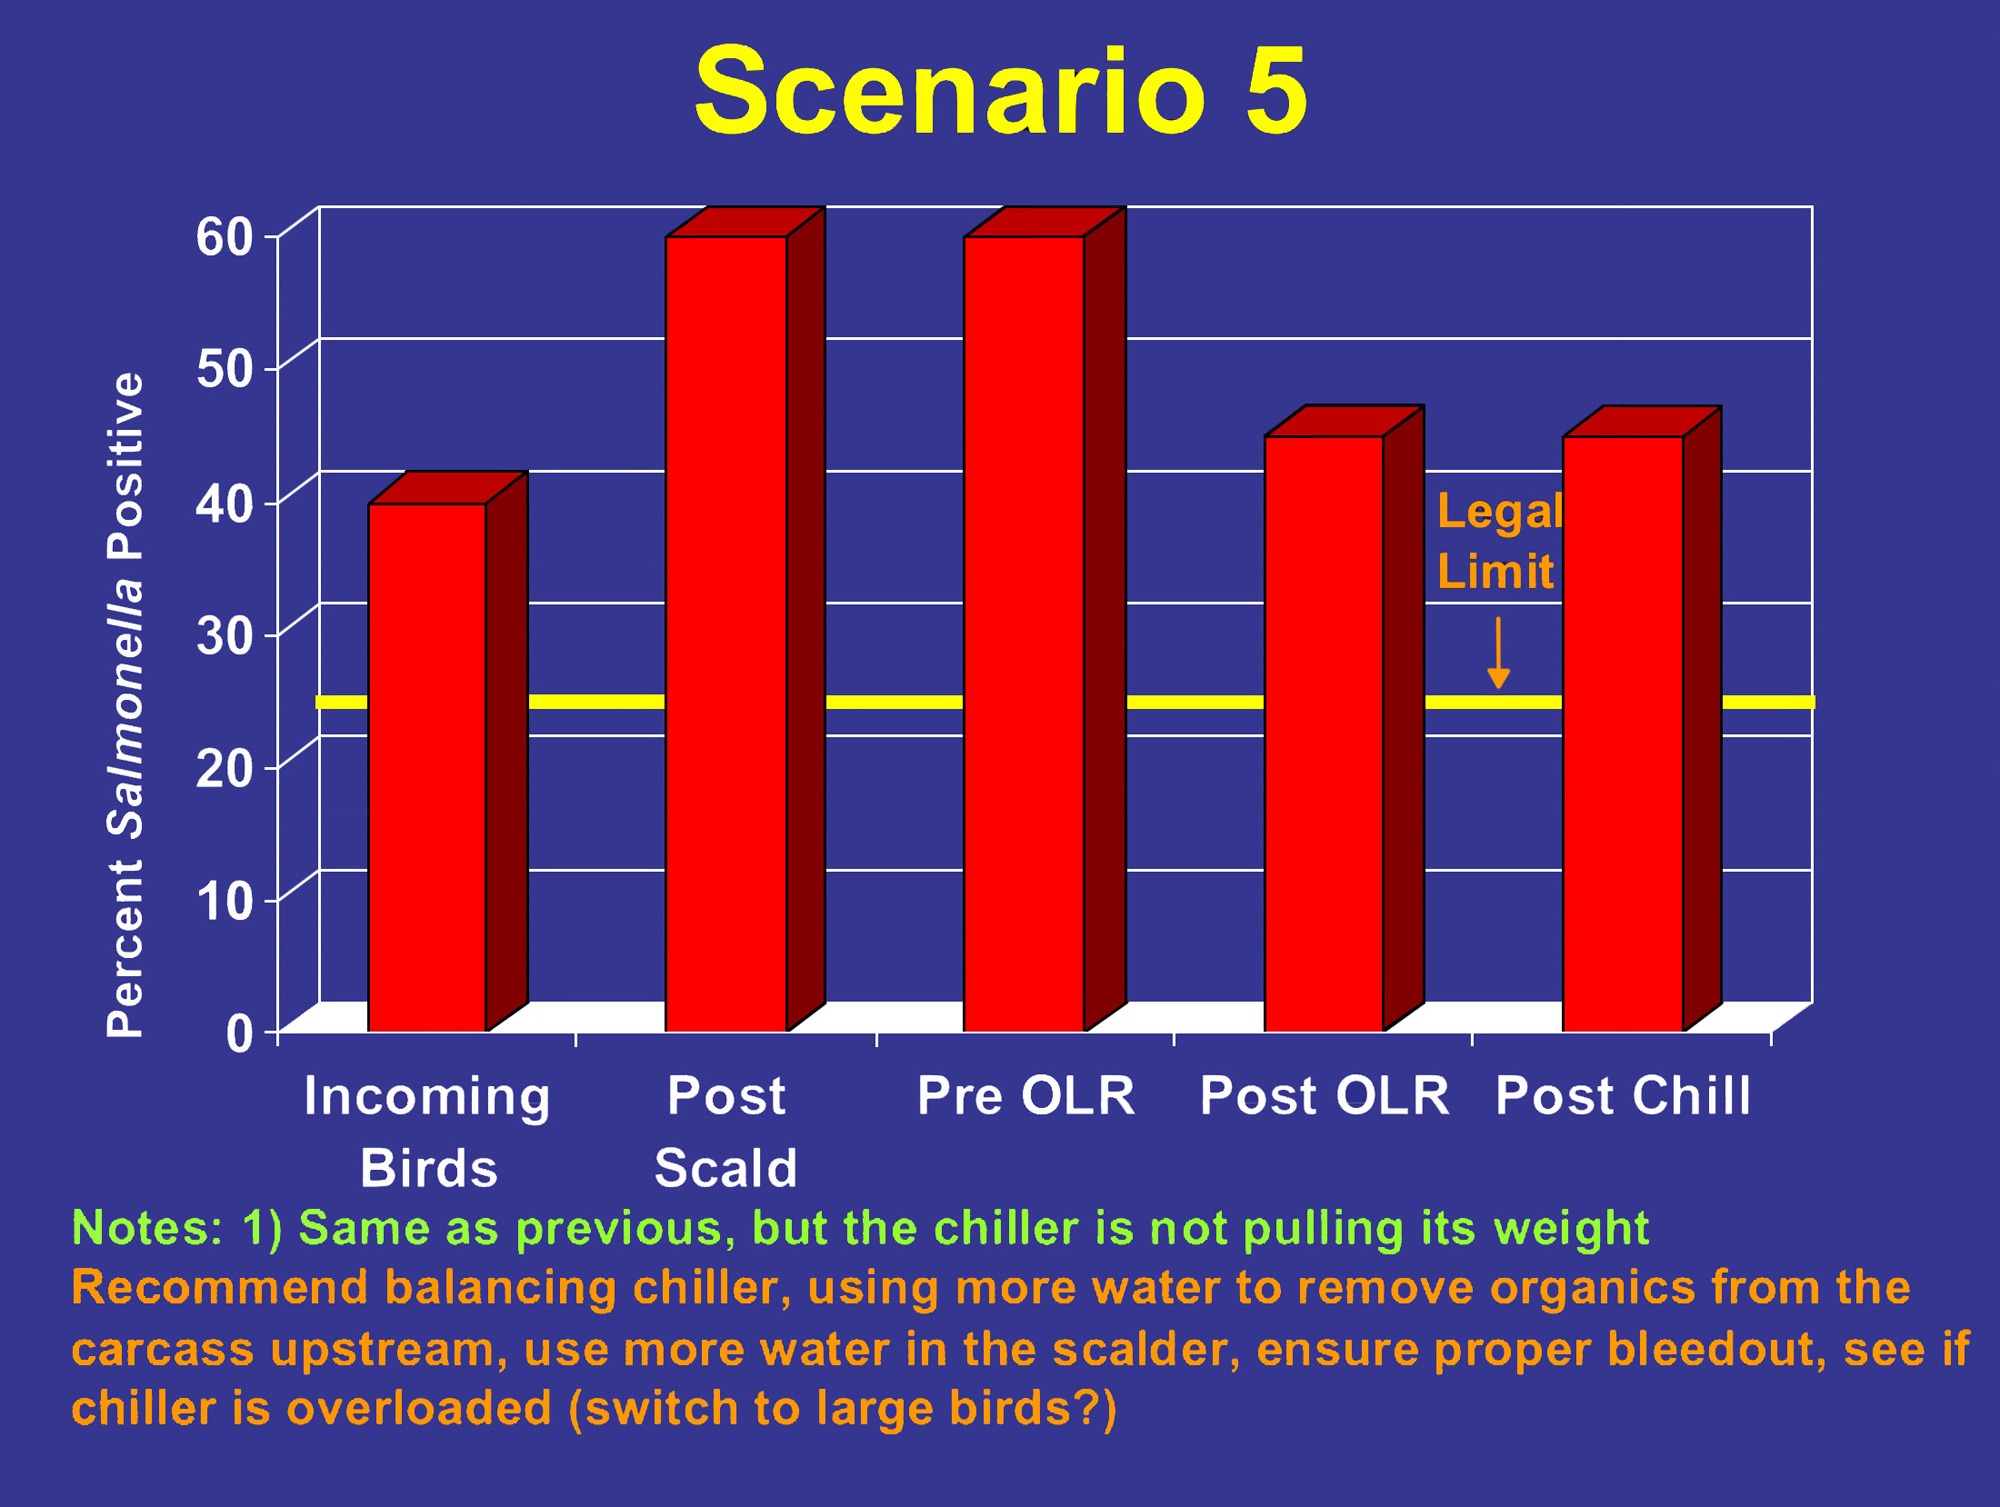 Bar graph showing percent of birds positive for salmonella throughout the plant process. Around 40% of inoming birds are positive. Post scald and pre OLR, 60% are positive. Post OLR and post chill, around 45% are positive